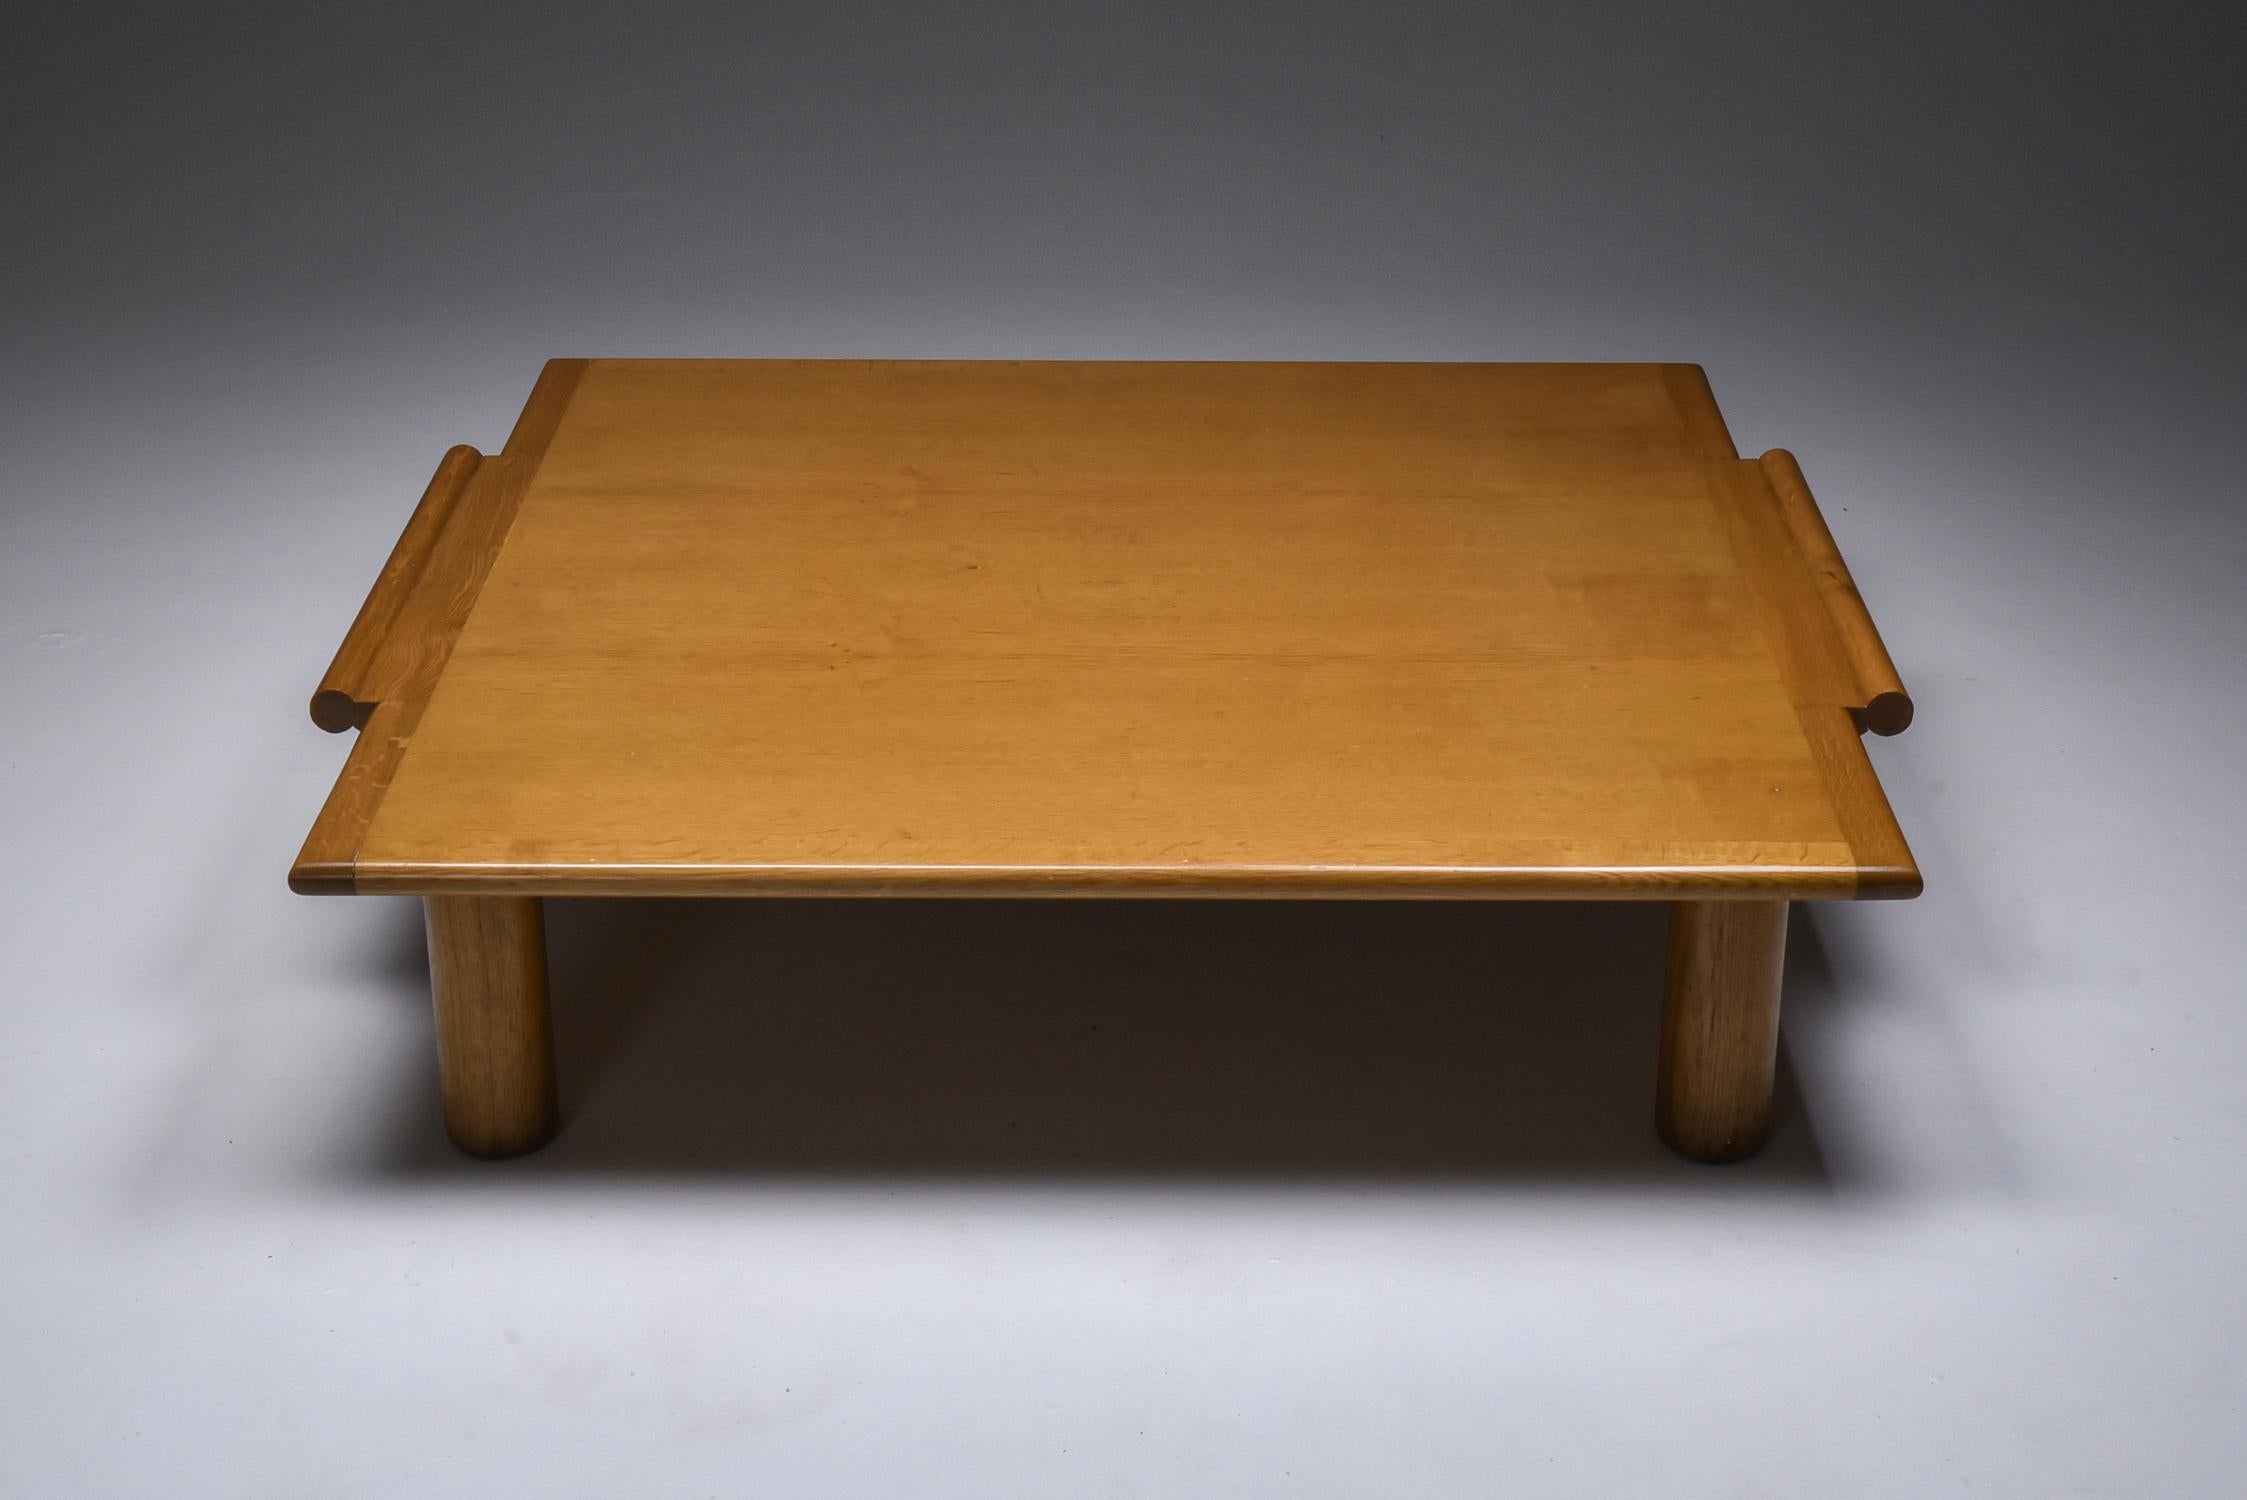 Minimalist coffee table in oak, Italy, 1970s

would fit well in a rustic modern, zen wabi sabi interior
A nice detail are the two handles on the side of the top, these give you the impression the table is like a tray you can lift up and take